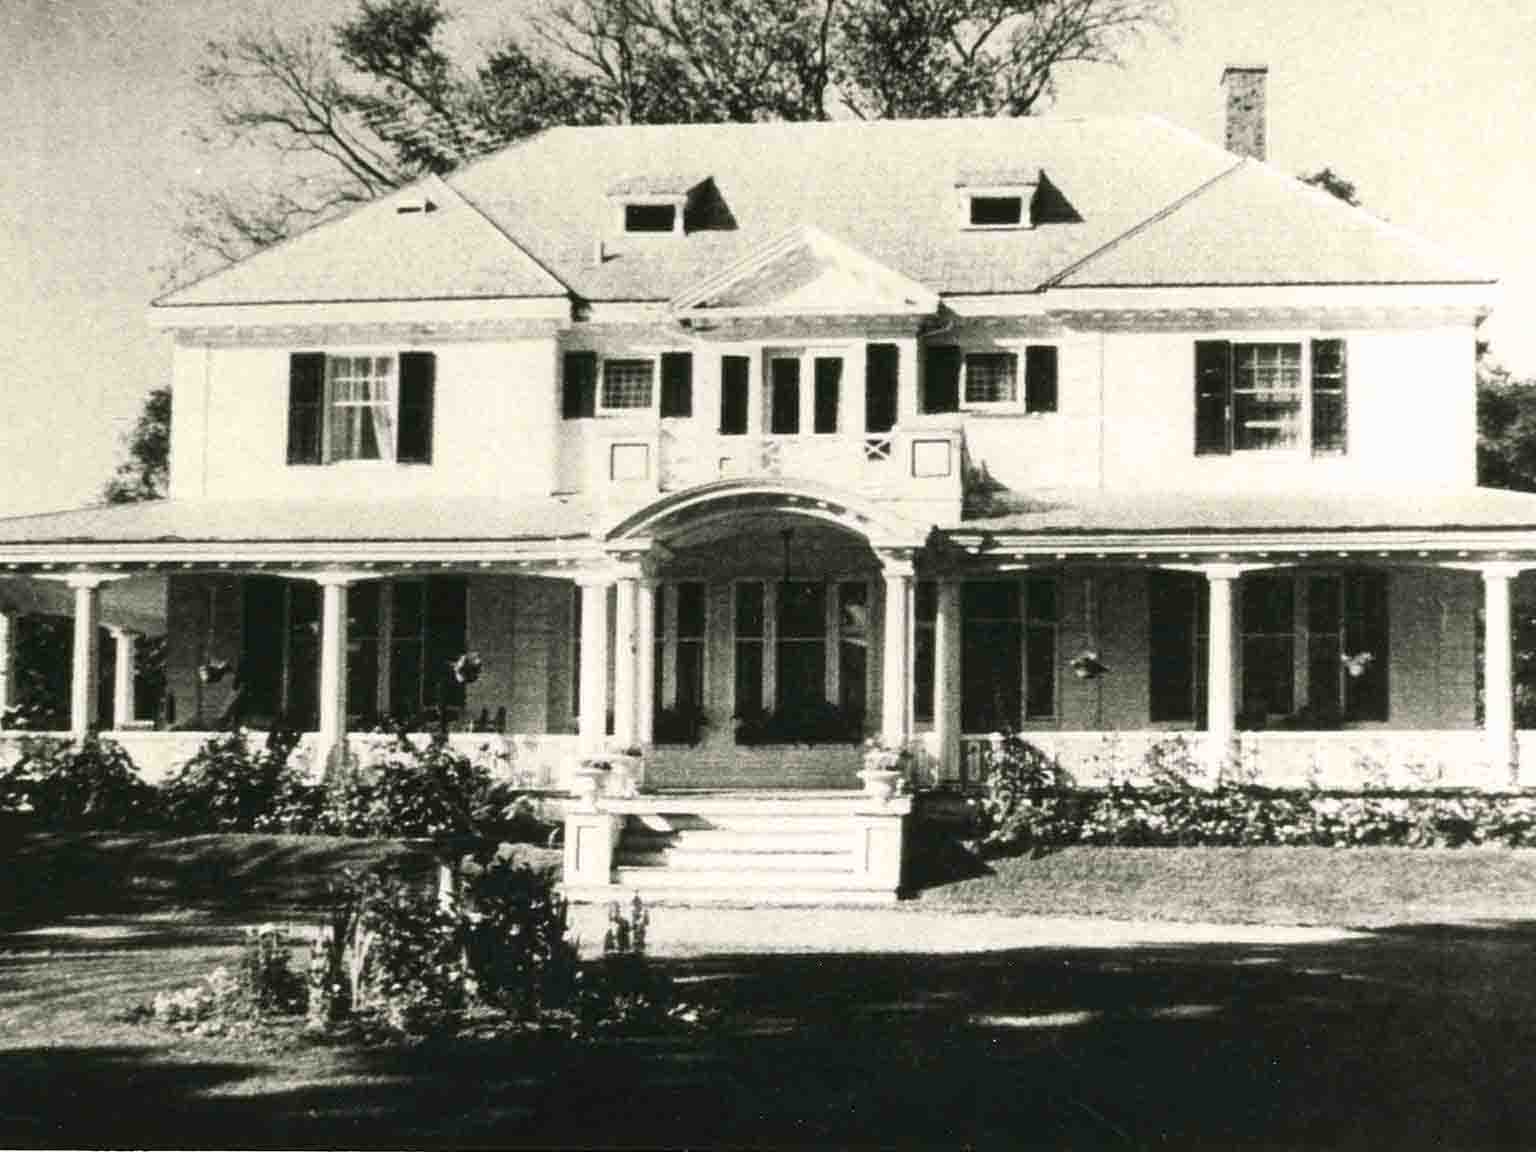 Odell House